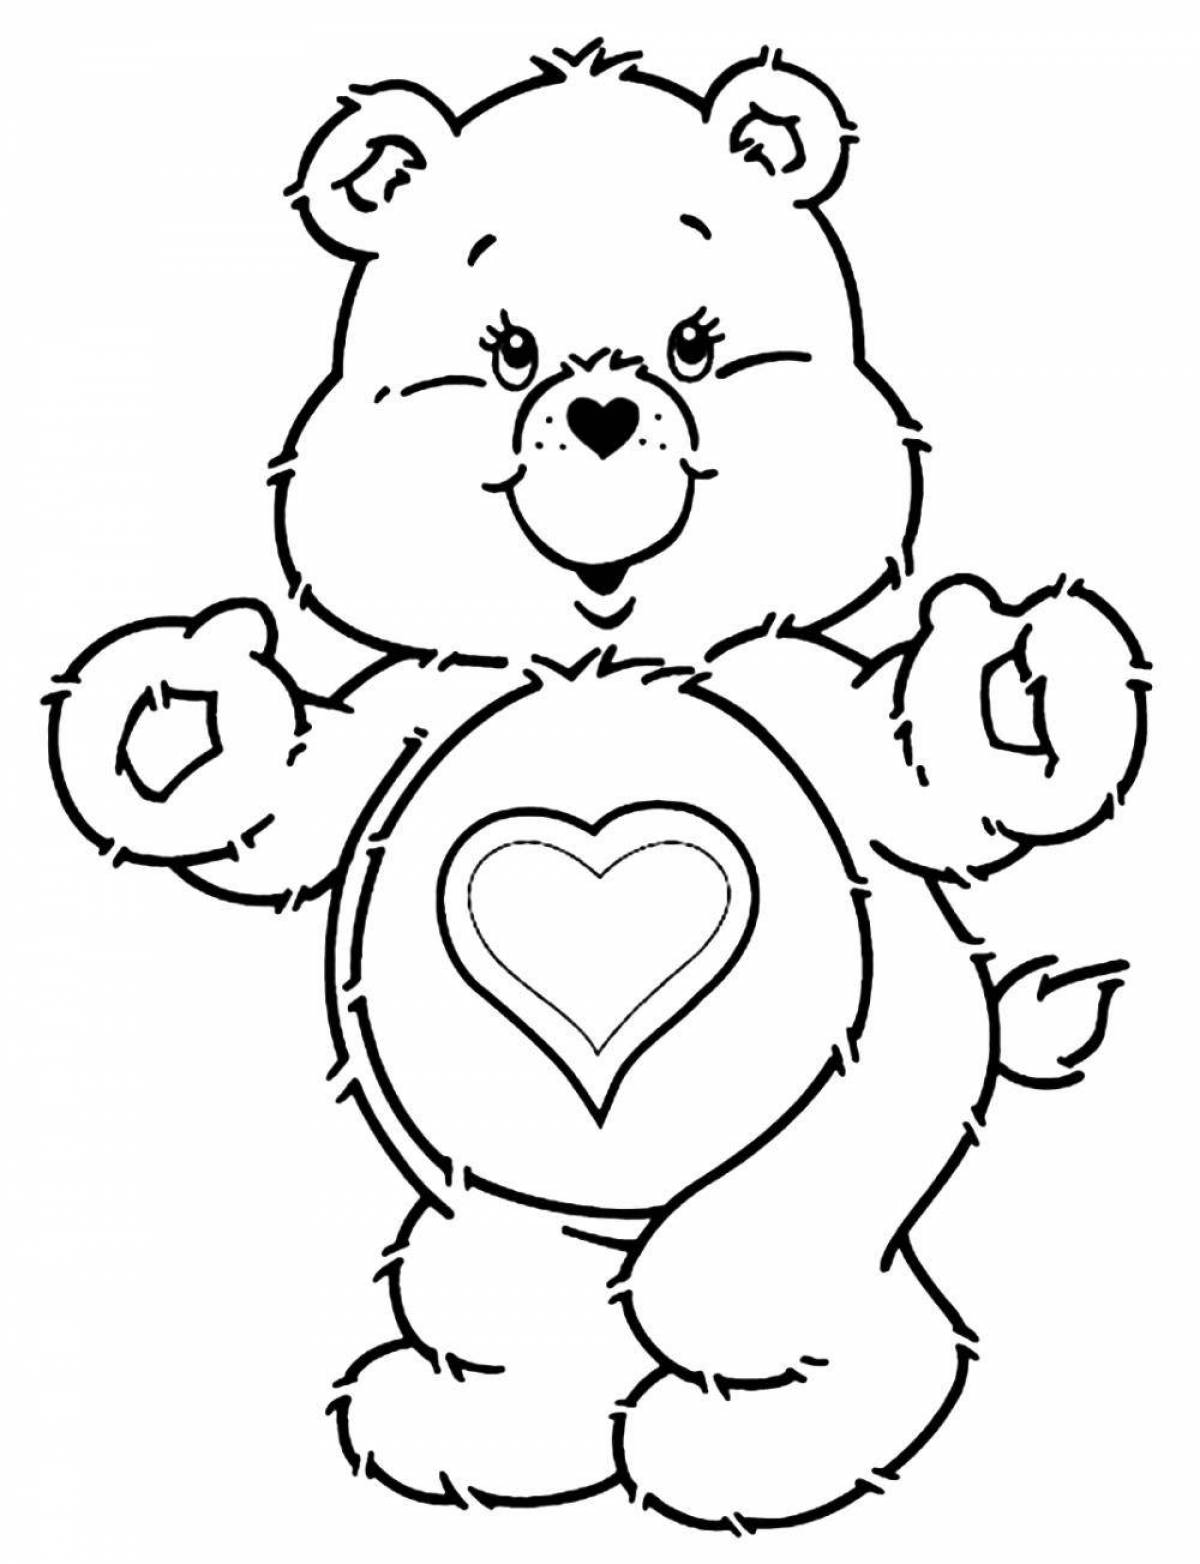 Violent bear with heart pattern